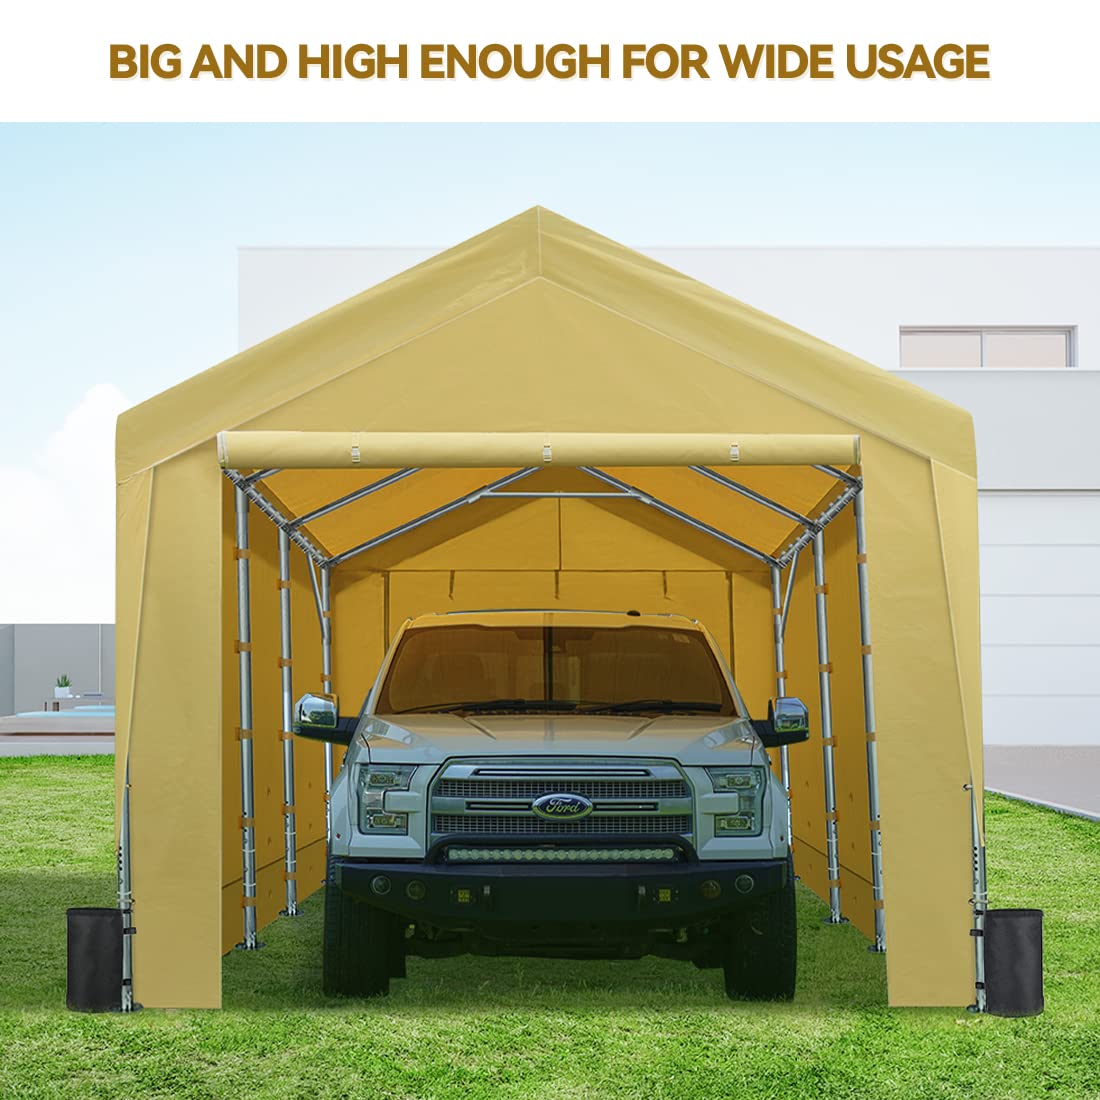 ADVANCE OUTDOOR 12x20 ft Heavy Duty Carport with Sidewalls & Doors, Adjustable Height from 9.5 to 11 ft, Car Canopy Garage Party Tent Boat Shelter 8 Reinforced Poles and 4 Sandbags, Beige 017BY-1 With Sidewall